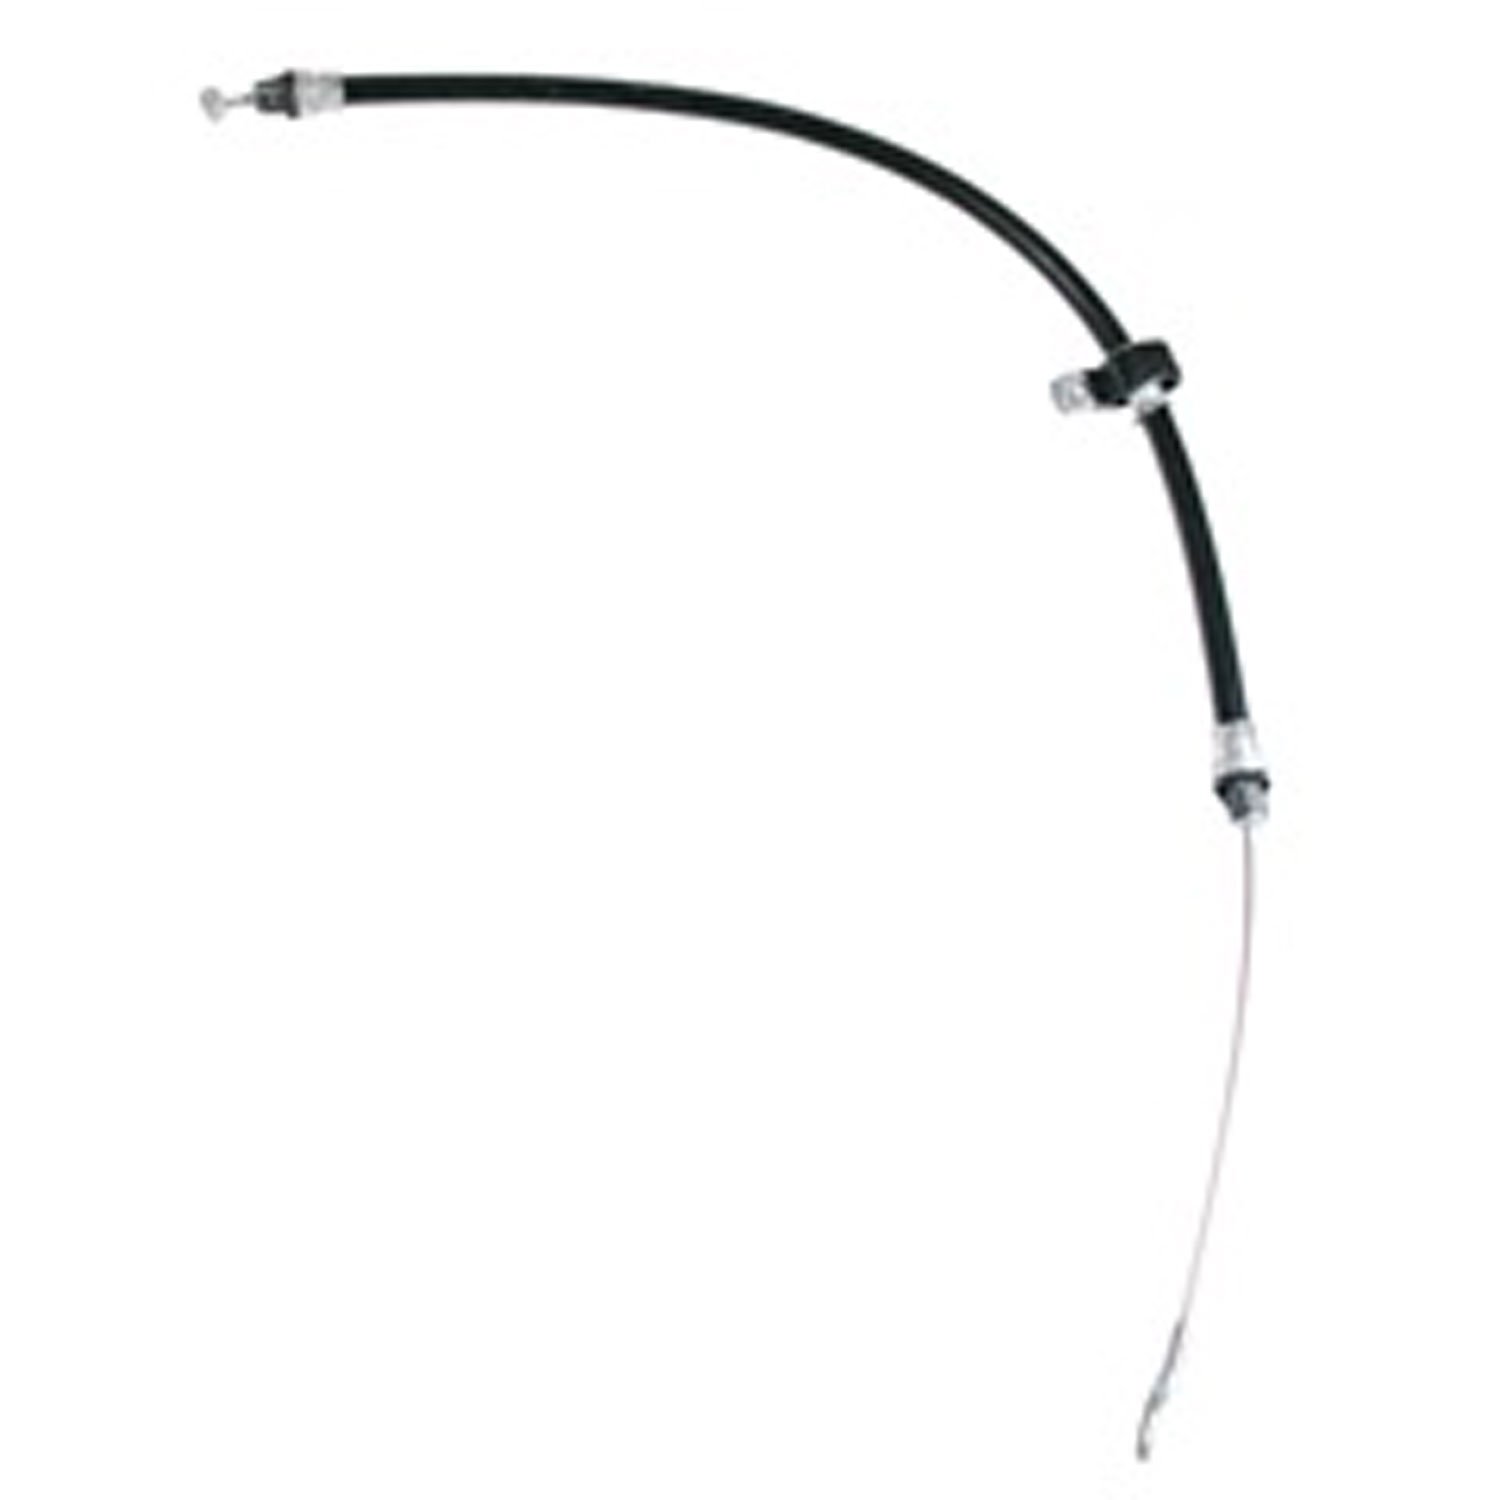 This left rear parking brake cable from Omix-ADA fits 1993-1998 Jeep Grand Cherokees with drum brakes.